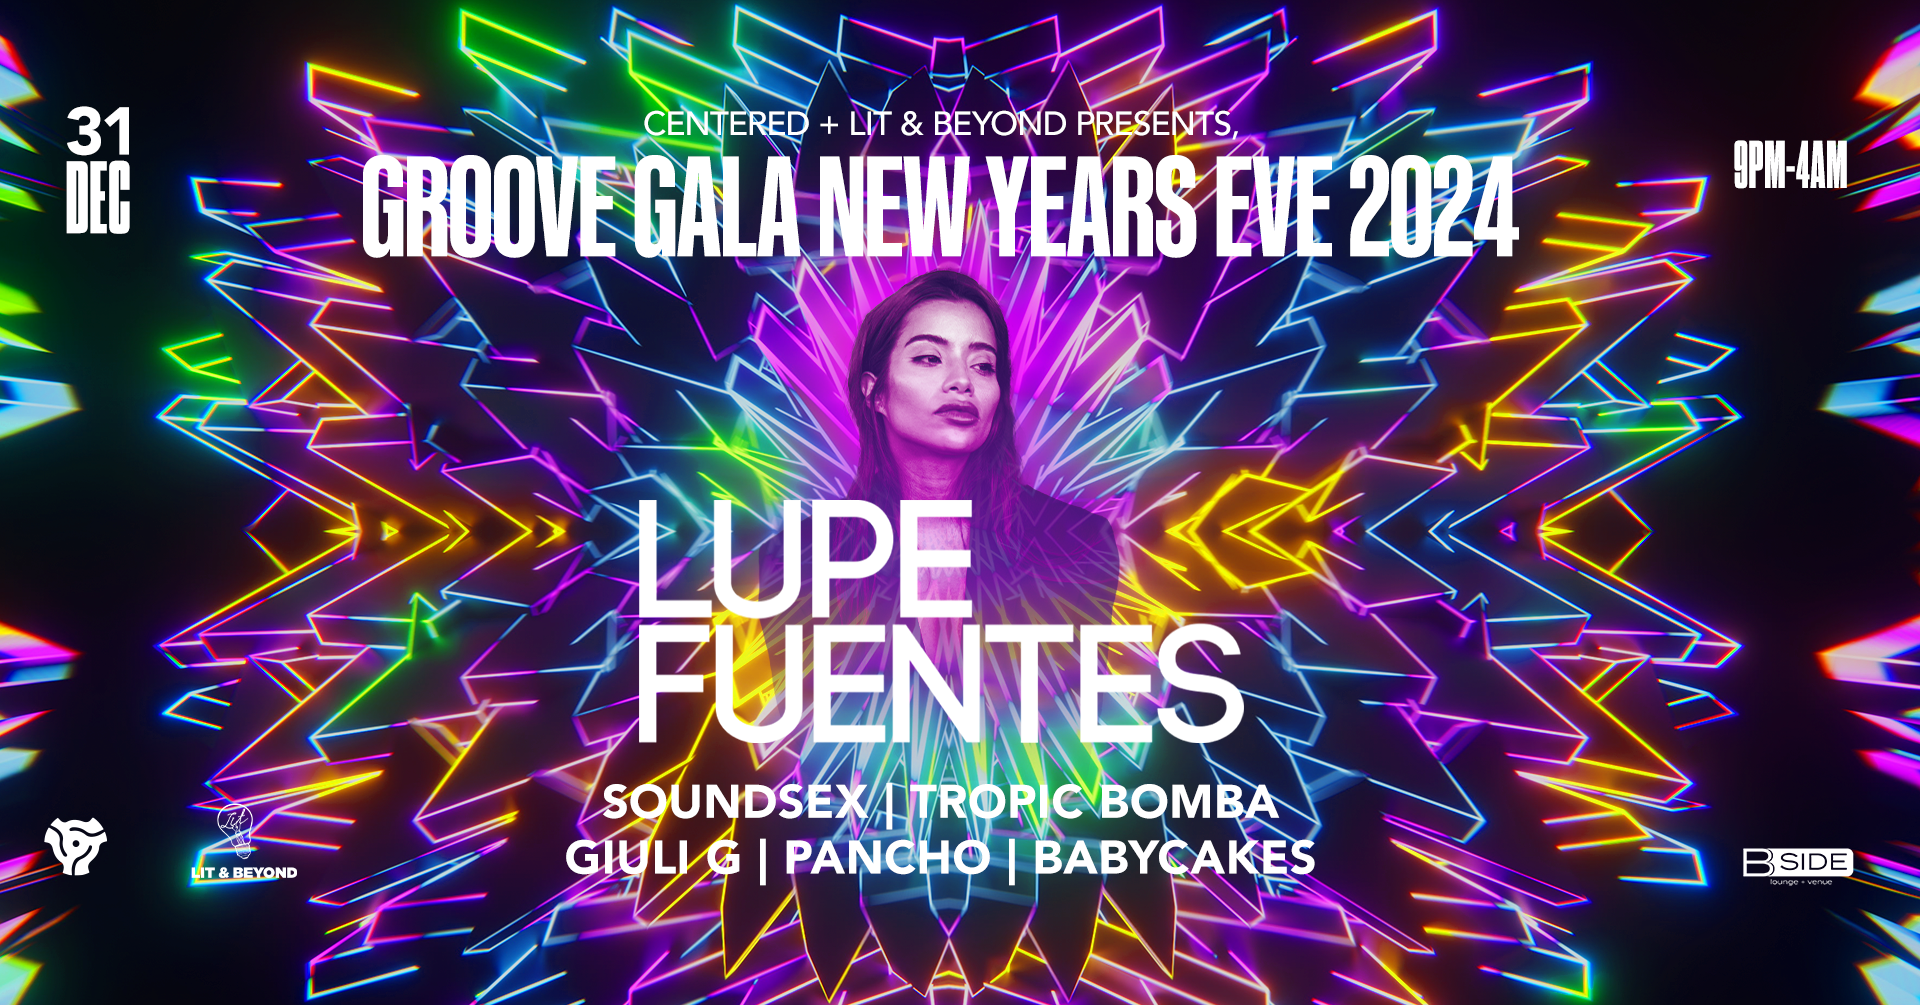 Centered + Lit & Beyond presents, GROOVE GALA NYE 2024 - フライヤー表